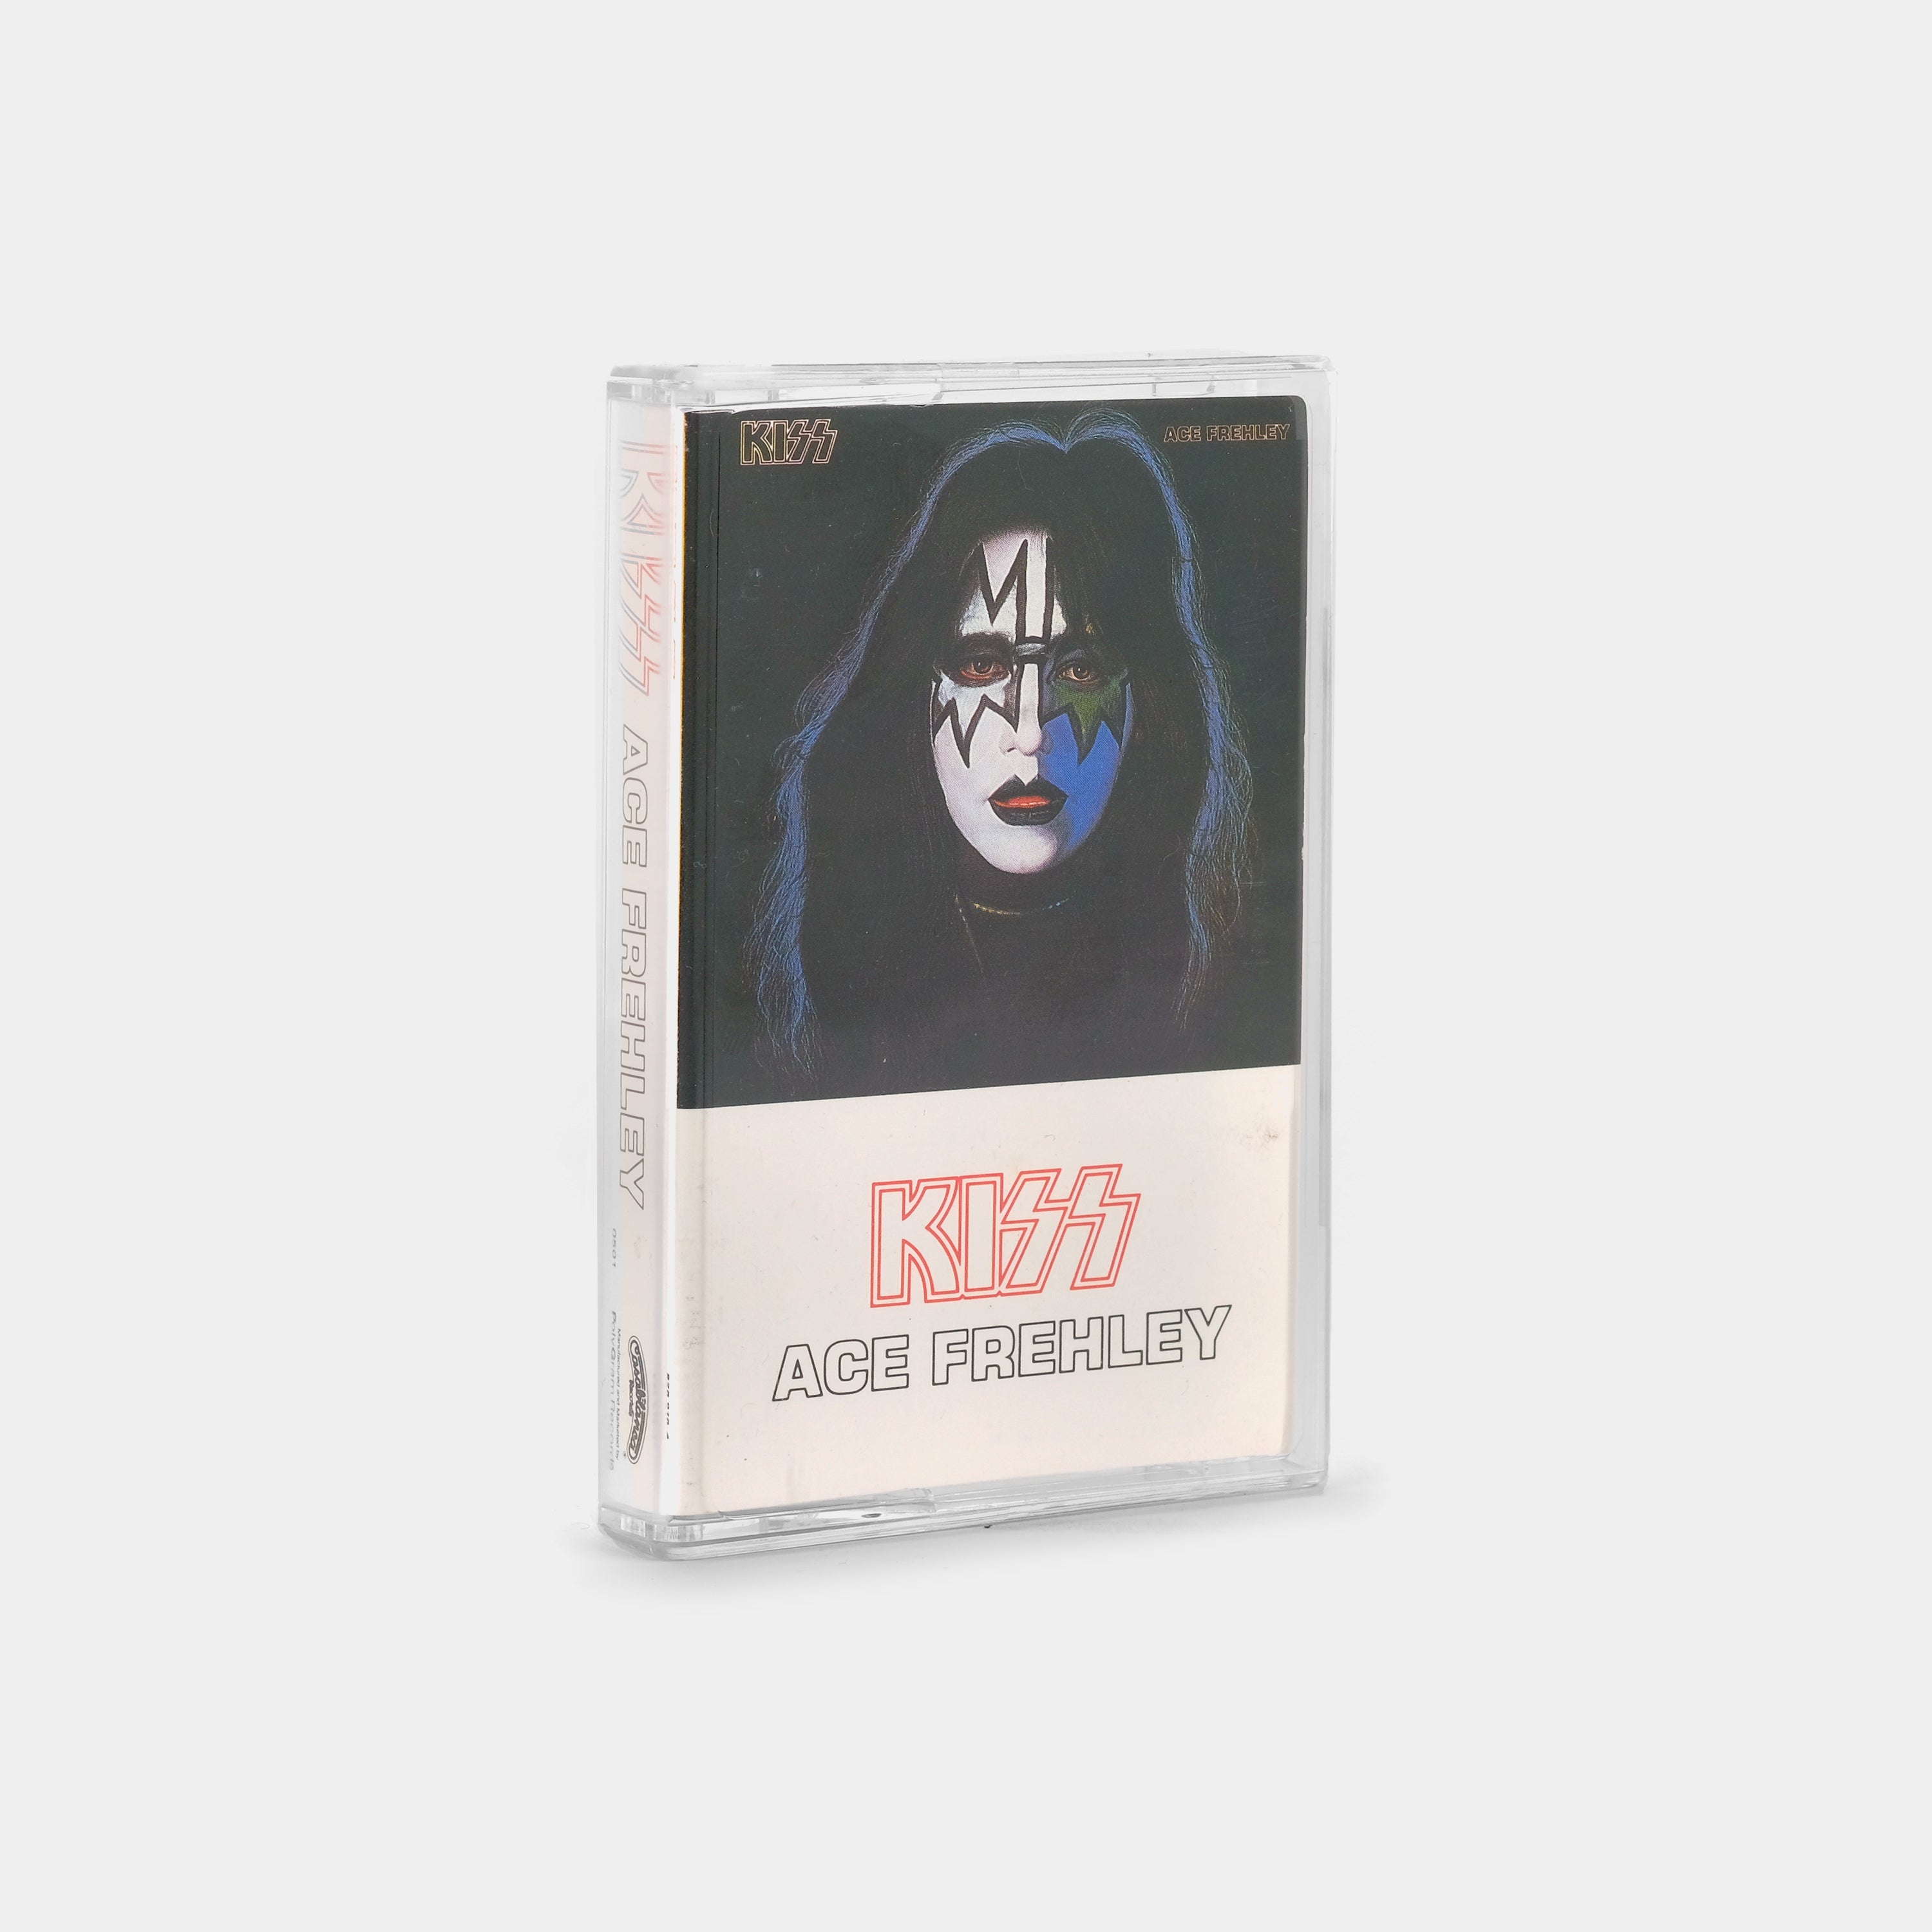 KISS, Ace Frehley - Ace Frehley Cassette Tape